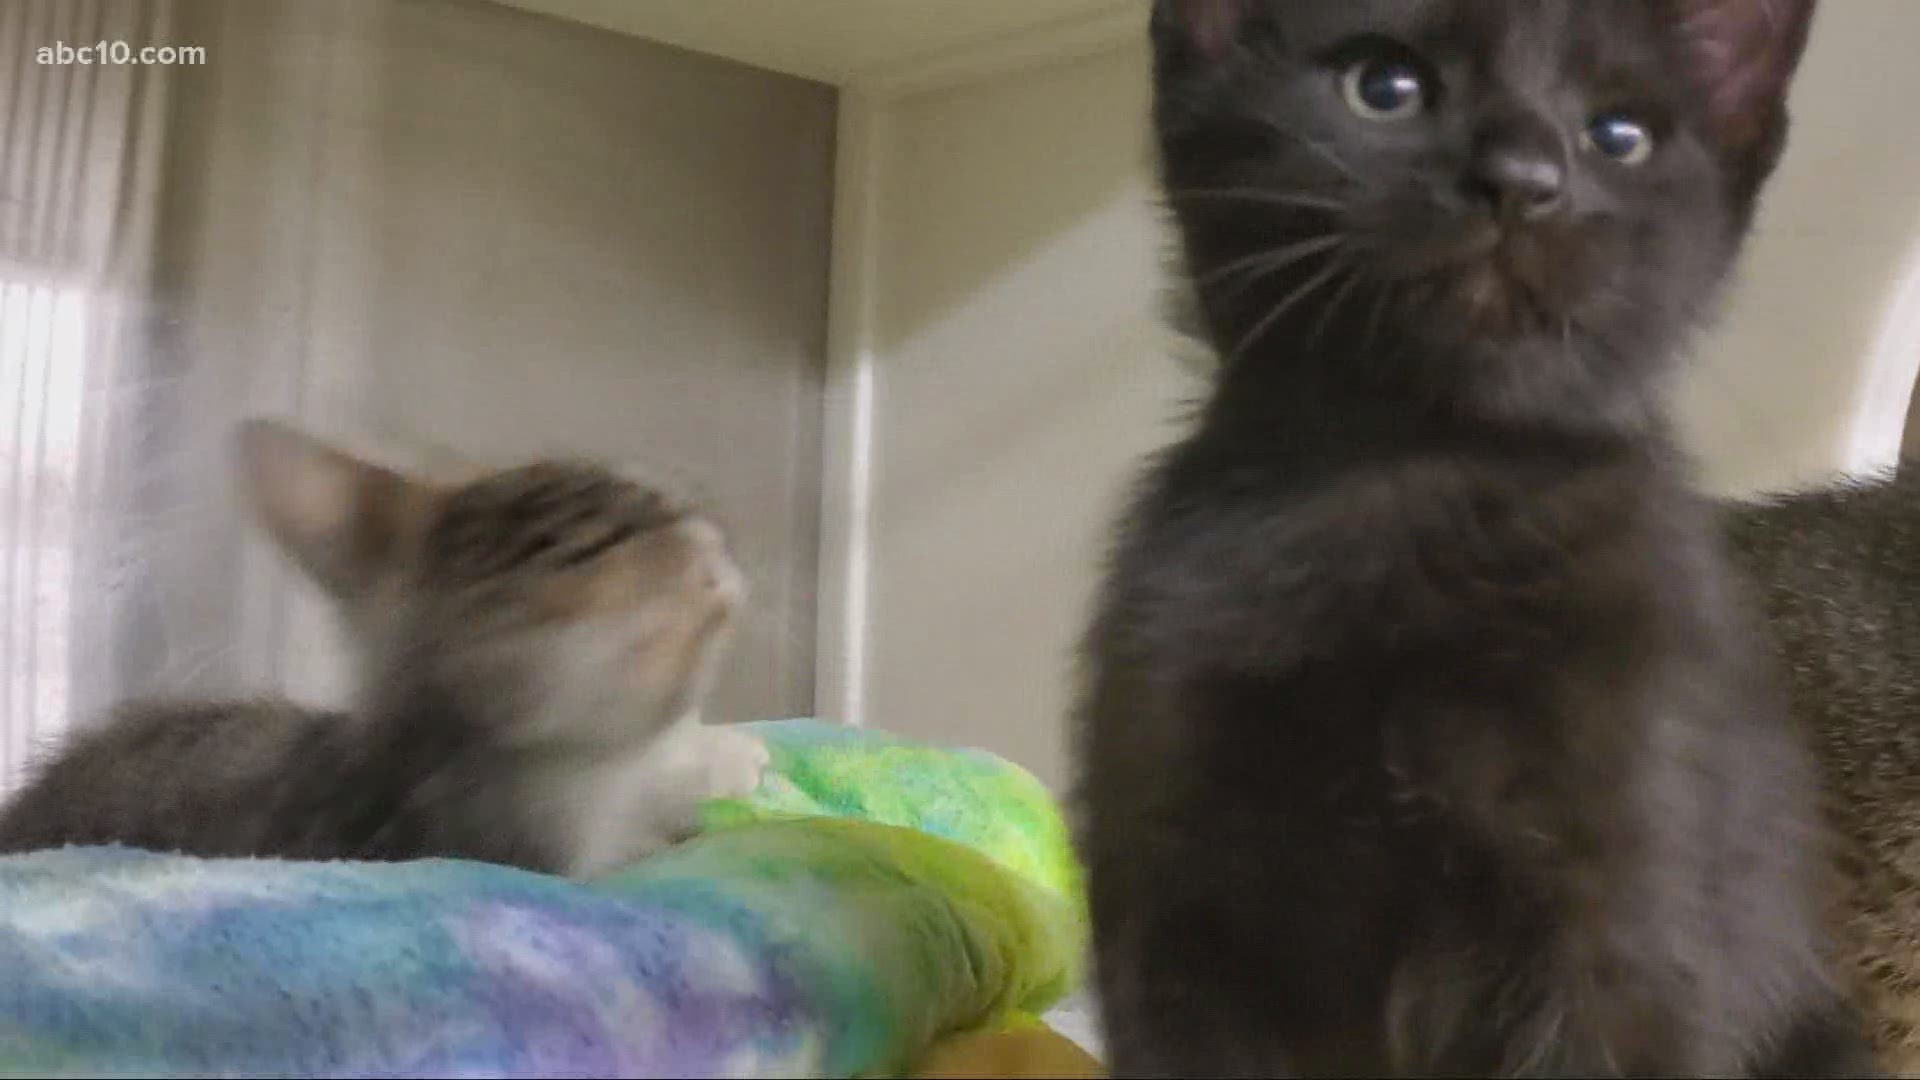 Yolo County Animal Shelter brings some 'Paw'sitivity (and kittens looking for new homes)